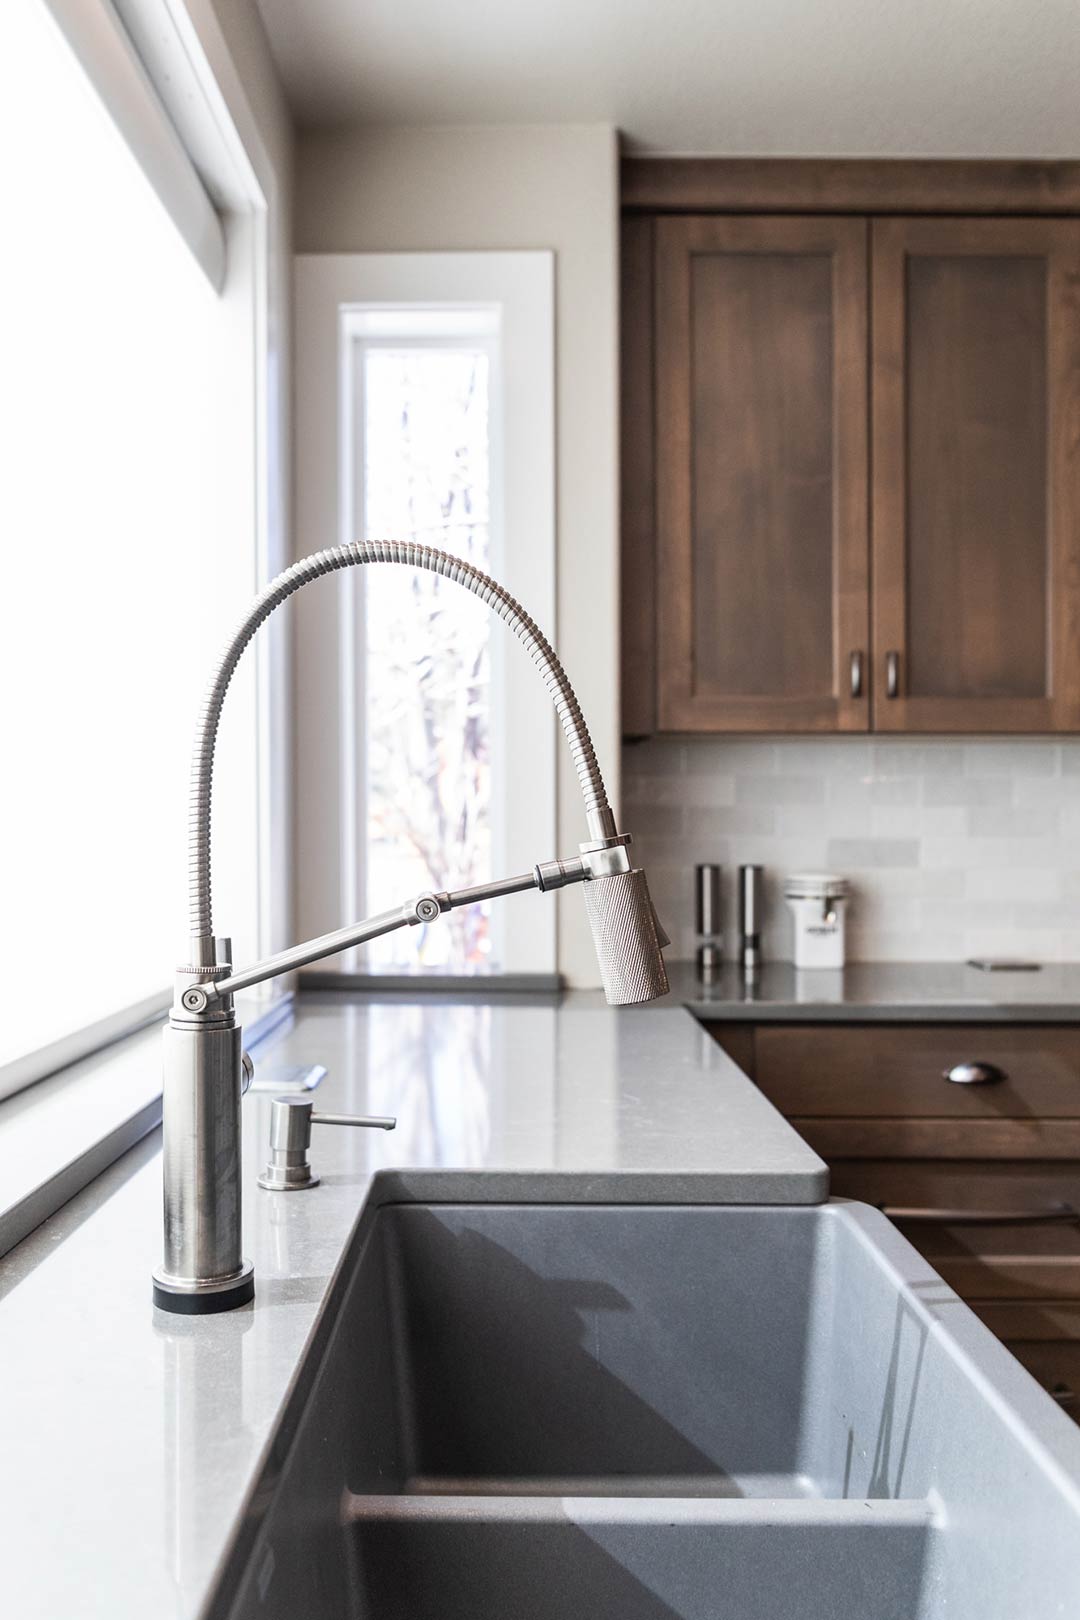 Detailed image of a transitional farmhouse style faucet over a modern apron sink in the Cliffrose Court project's kitchen